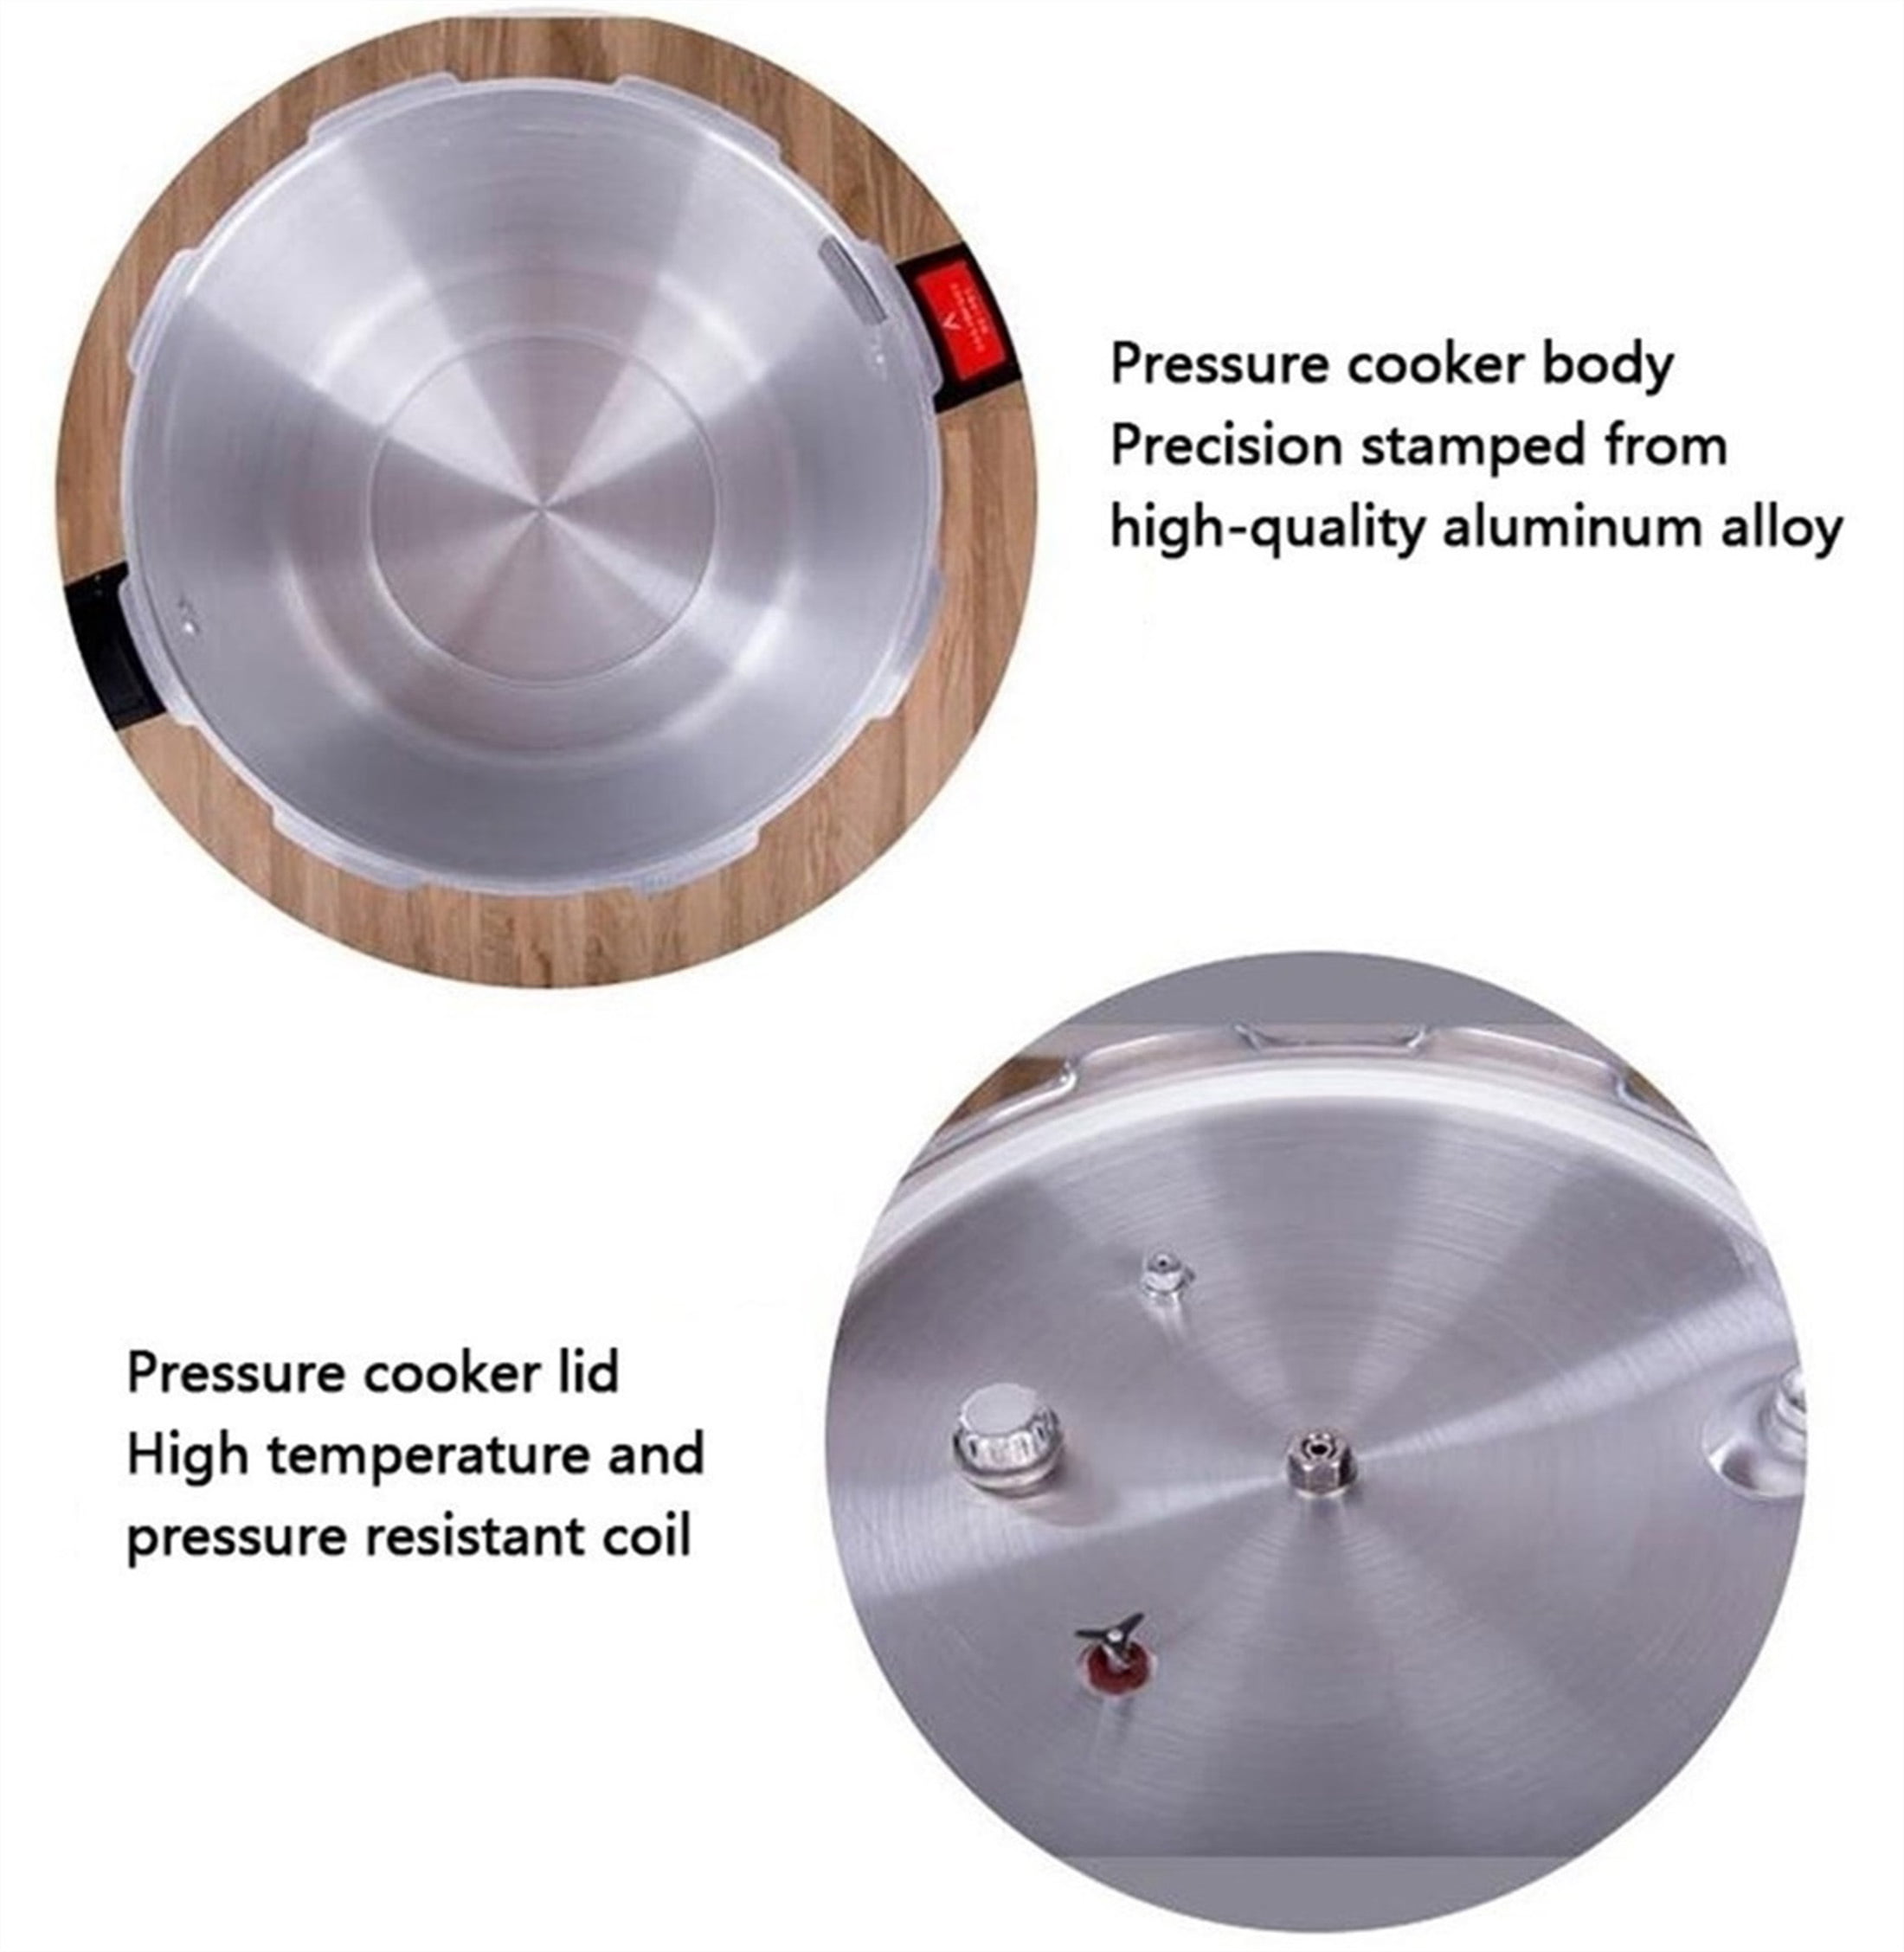  High capacity pressure cookers with cooking rack 15quart canning  pressure canner with gauge Explosion proof safety valve great for big  canning jobs,Compatible:natural gas-open flame: Home & Kitchen